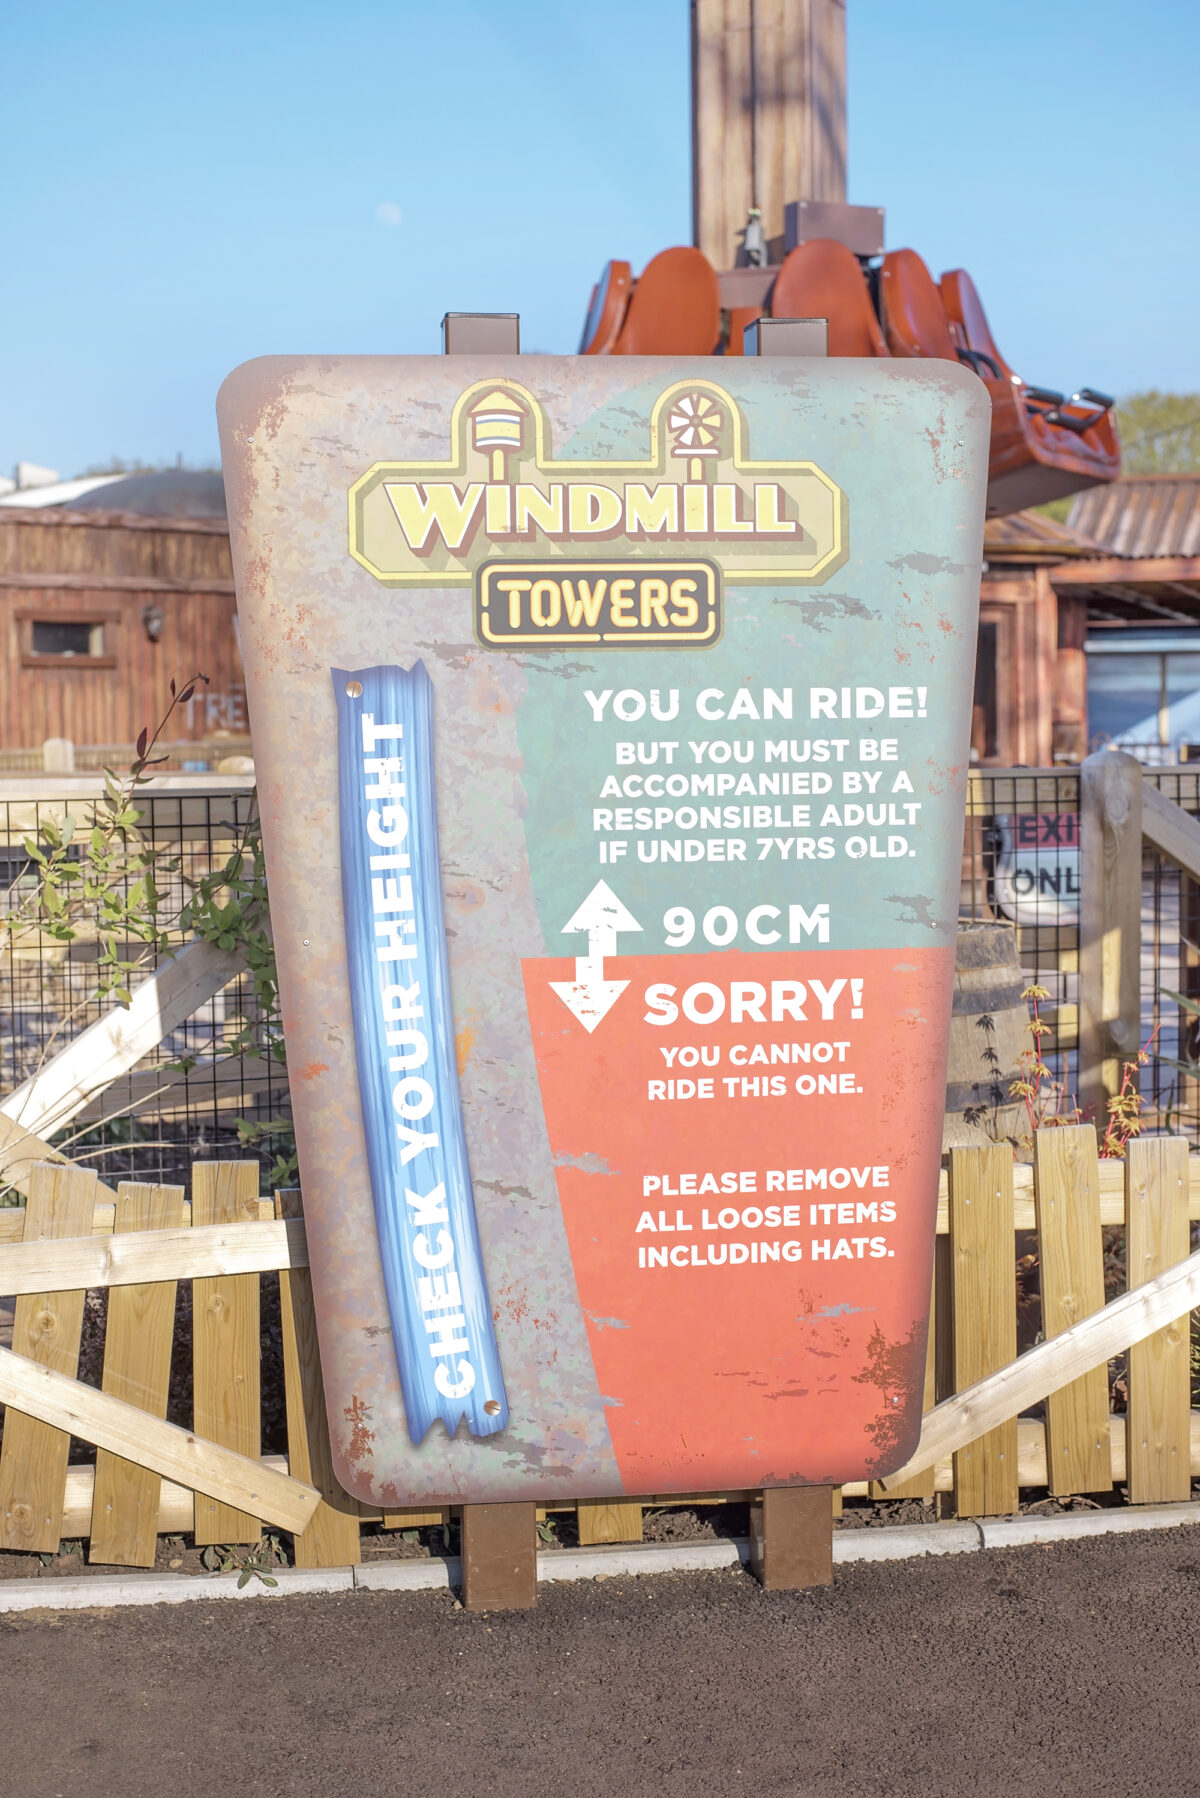 Image shows the ride restrictions for Windmill Falls at Tornado Springs in Paultons Park.